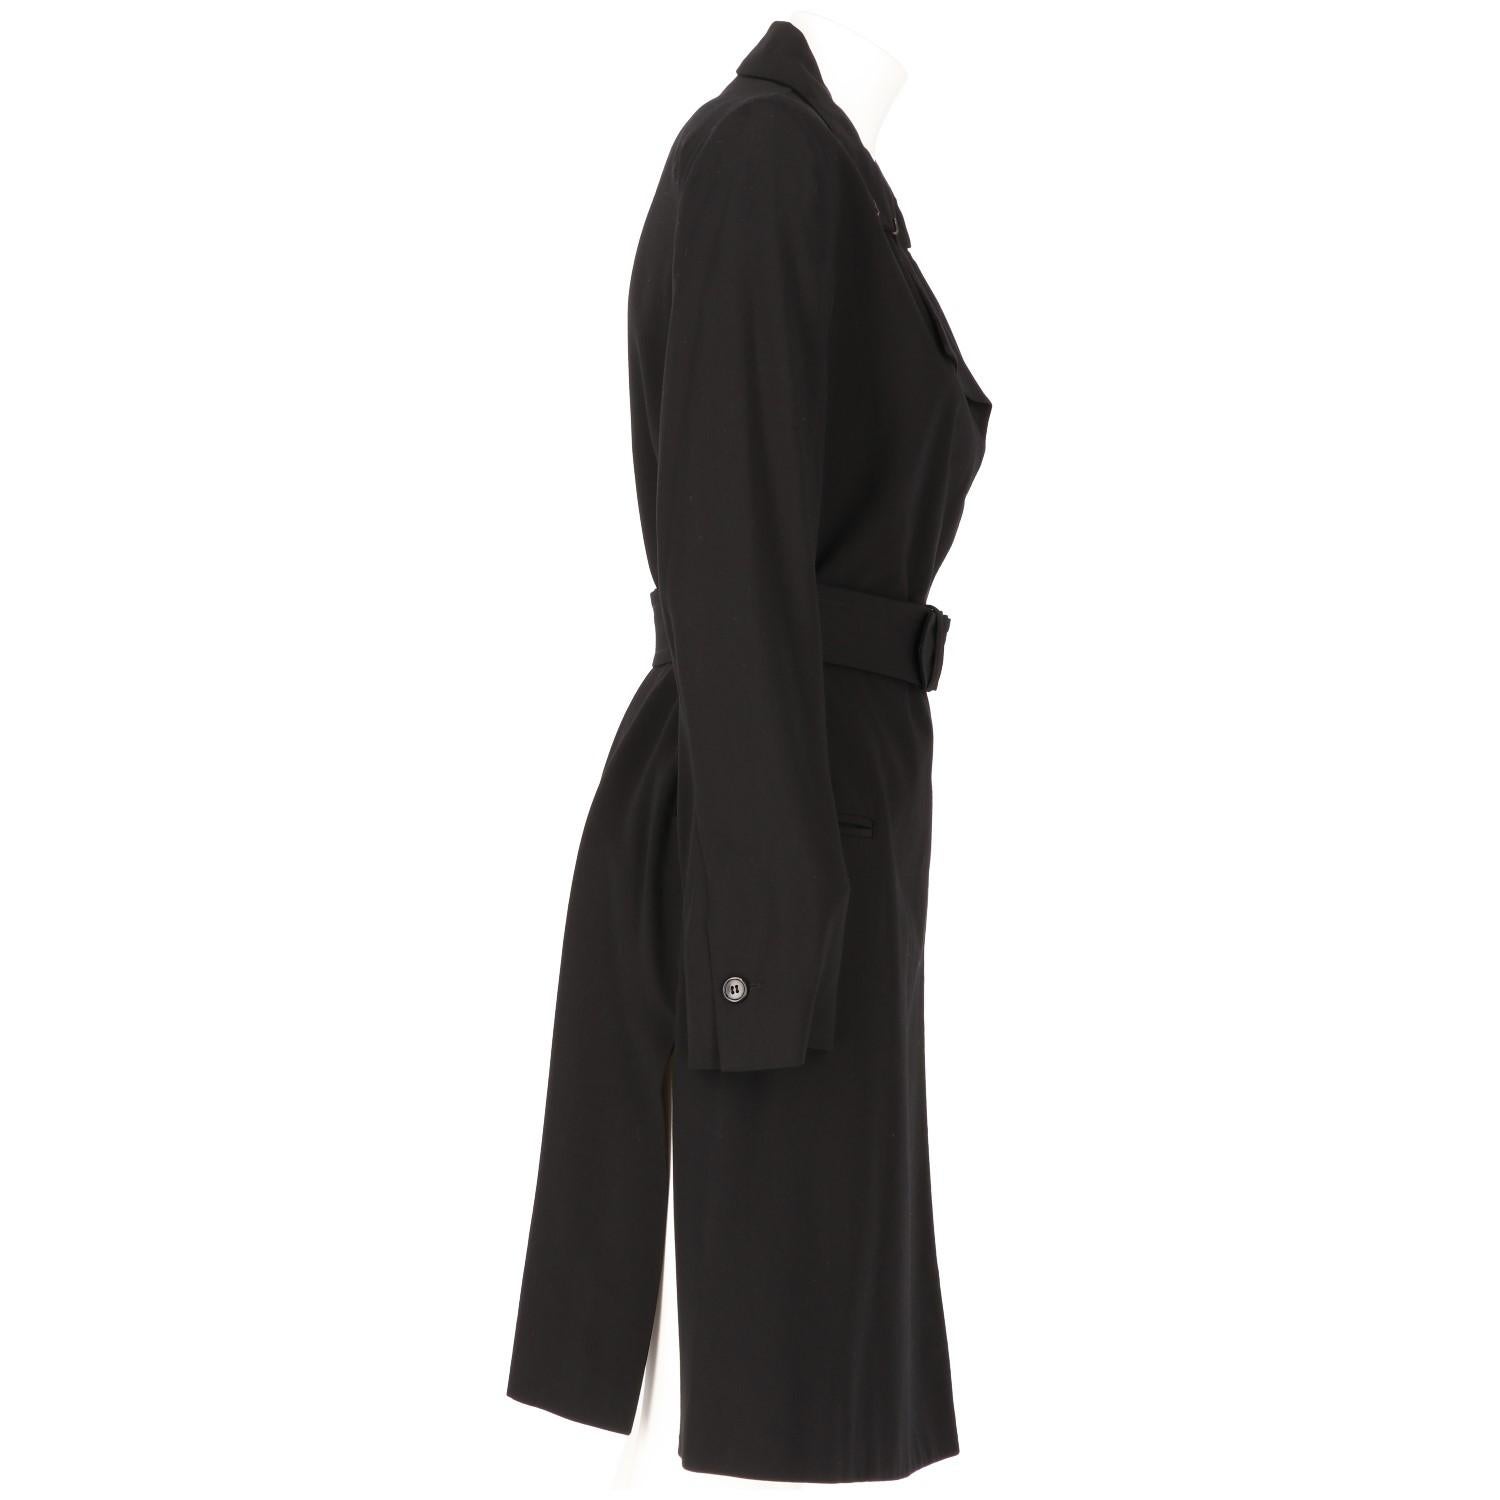 Ann Demeulemeester minimal blend wool black overcoat. Lightly padded shoulders, classic neckline with revers, hidden buttons fastenings on the front, adjustable belt, two frontal pockets. The item is vintage, it was produced in the 2000s and is in